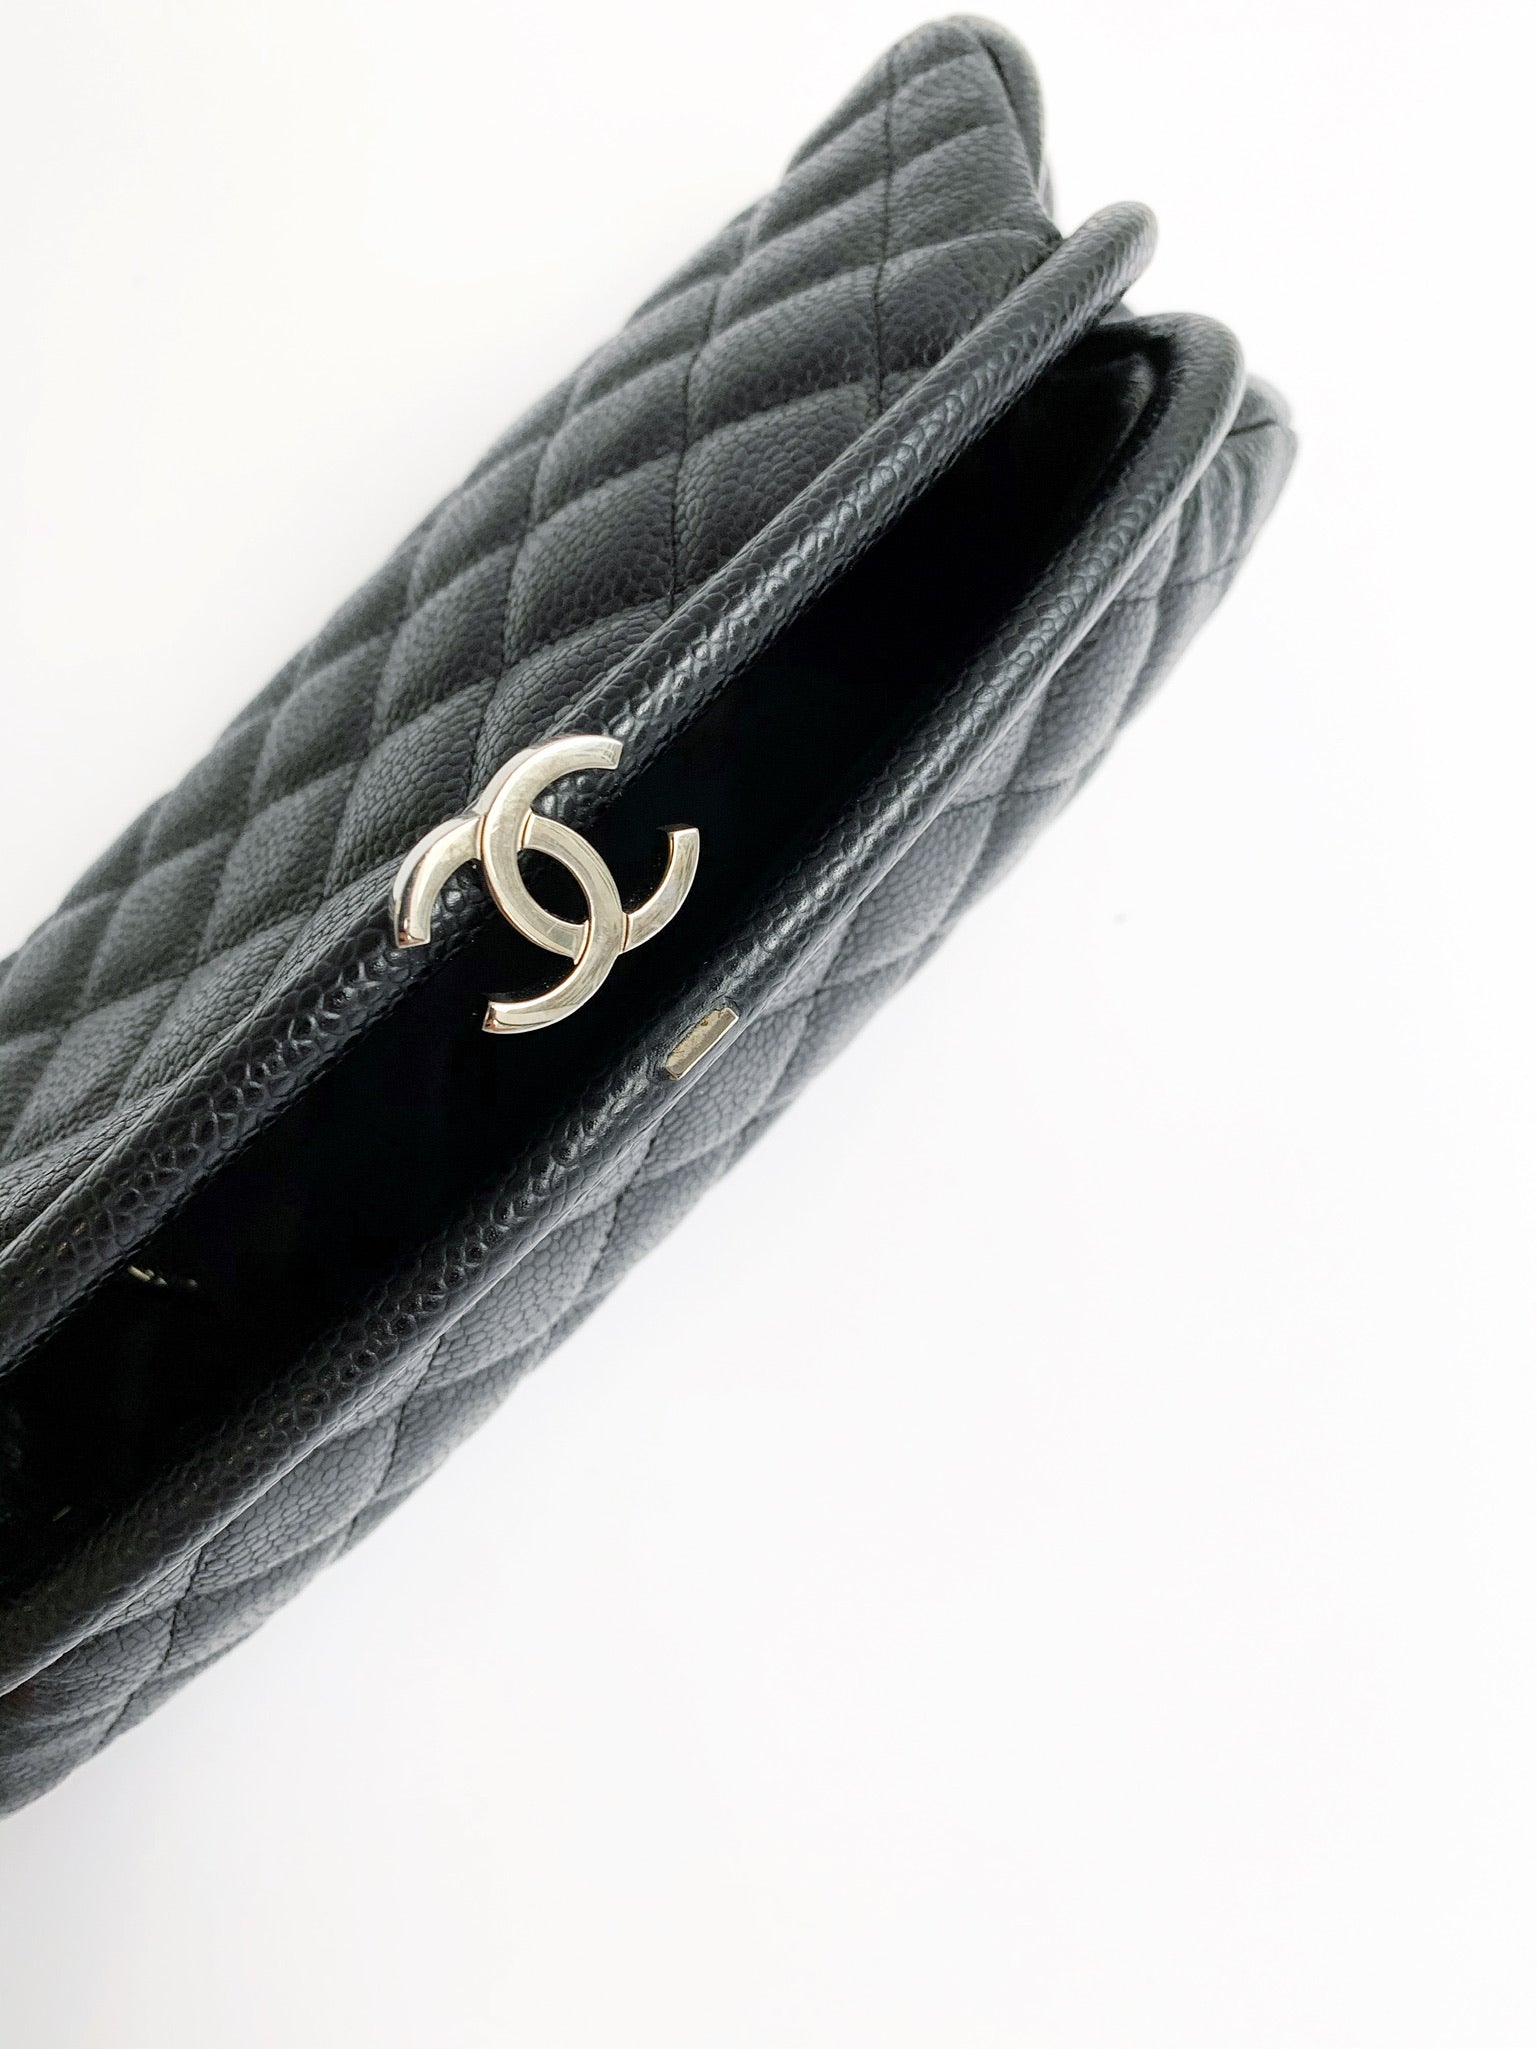 15C Chanel Black Caviar Quilted Timeless Kisslock Clutch Bag